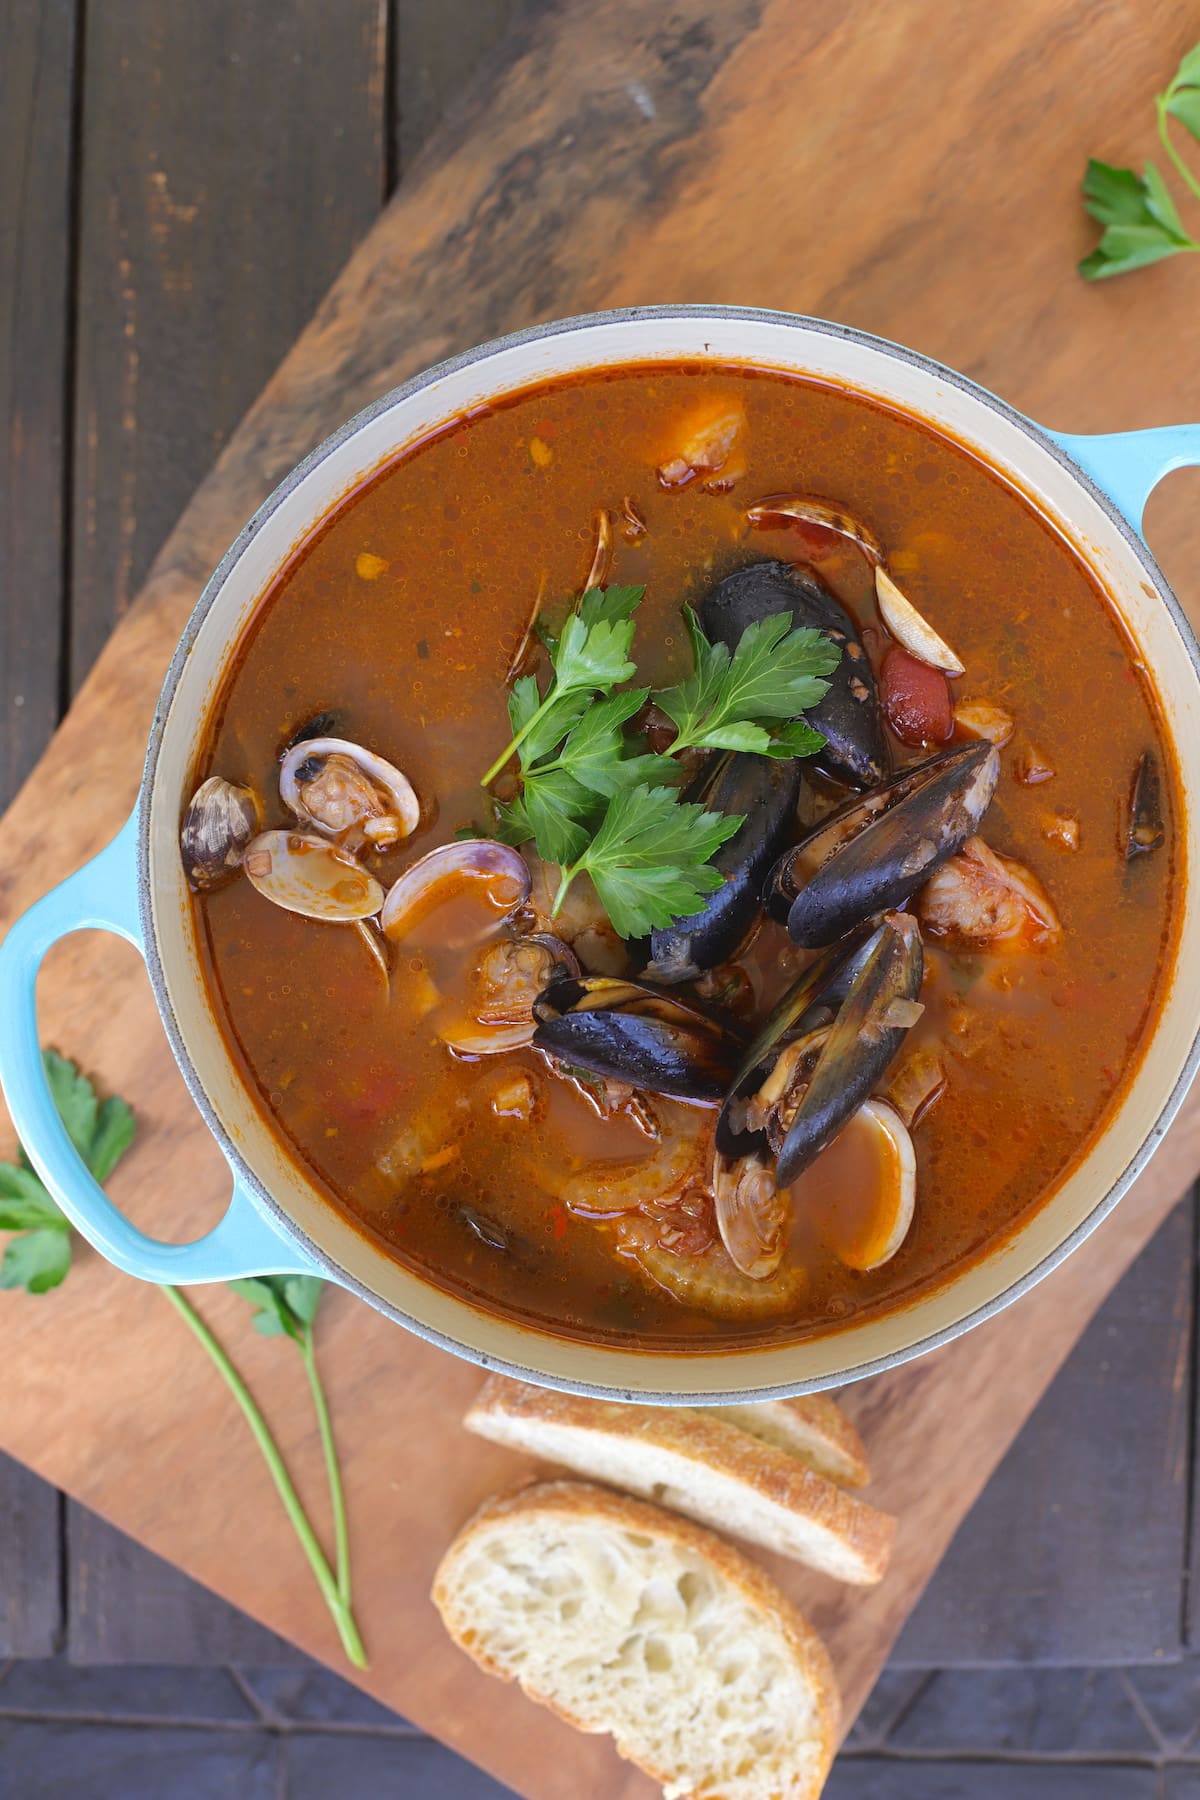 The best fish stew is Cioppino with mussels and clams.